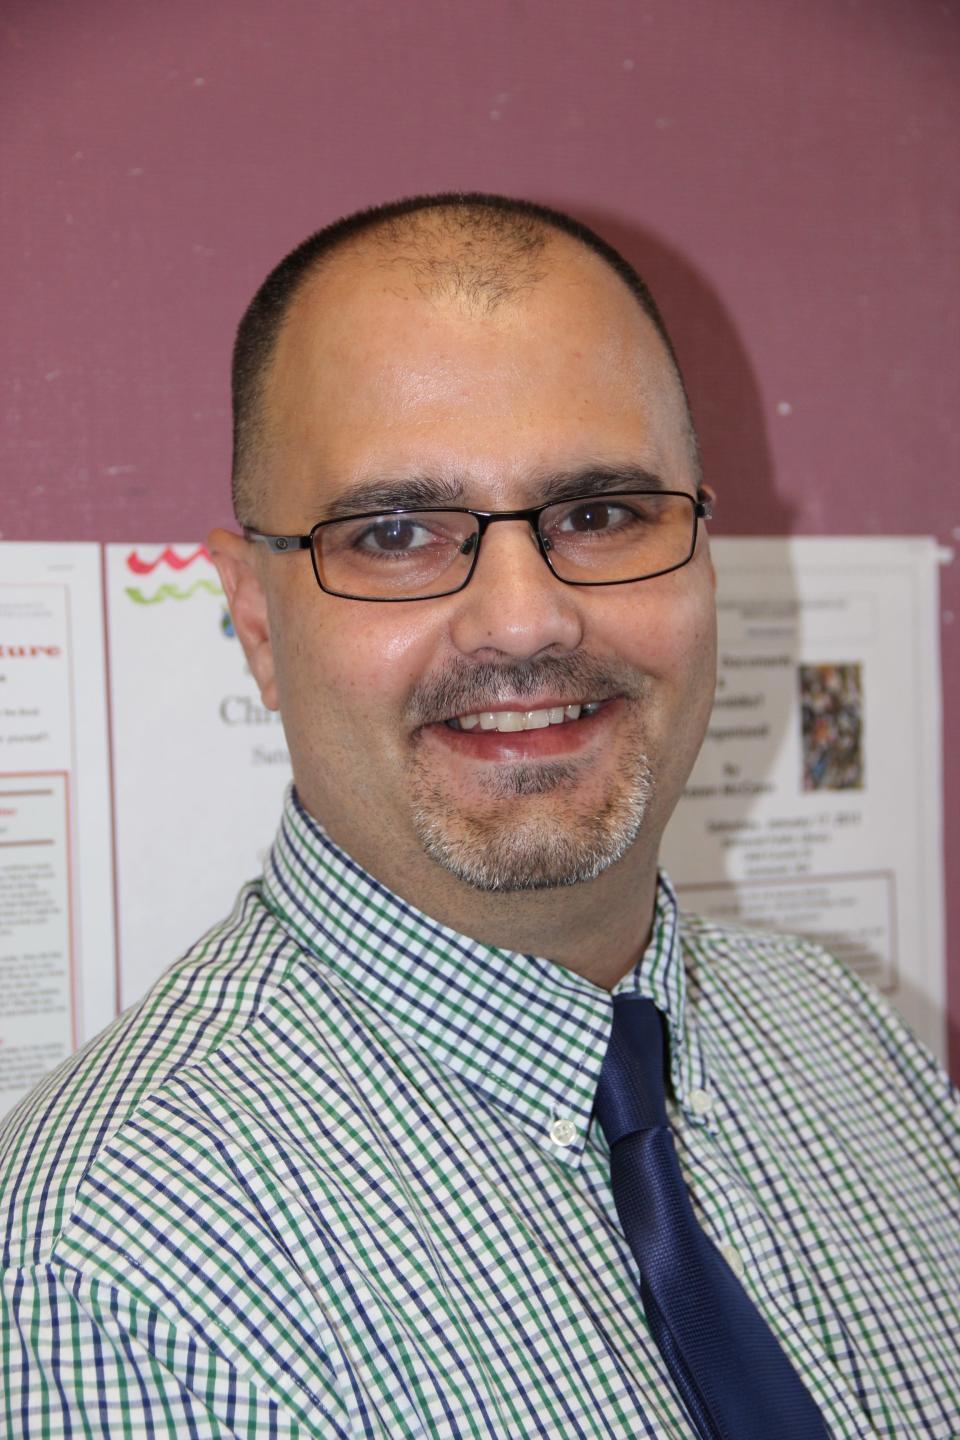 Kyle Alves, former assistant superintendent and principal at Diman Regional Vocational Tech High School in Fall River, will start the 2023-2024 school year as principal at Hastings Middle School in Fairhaven.